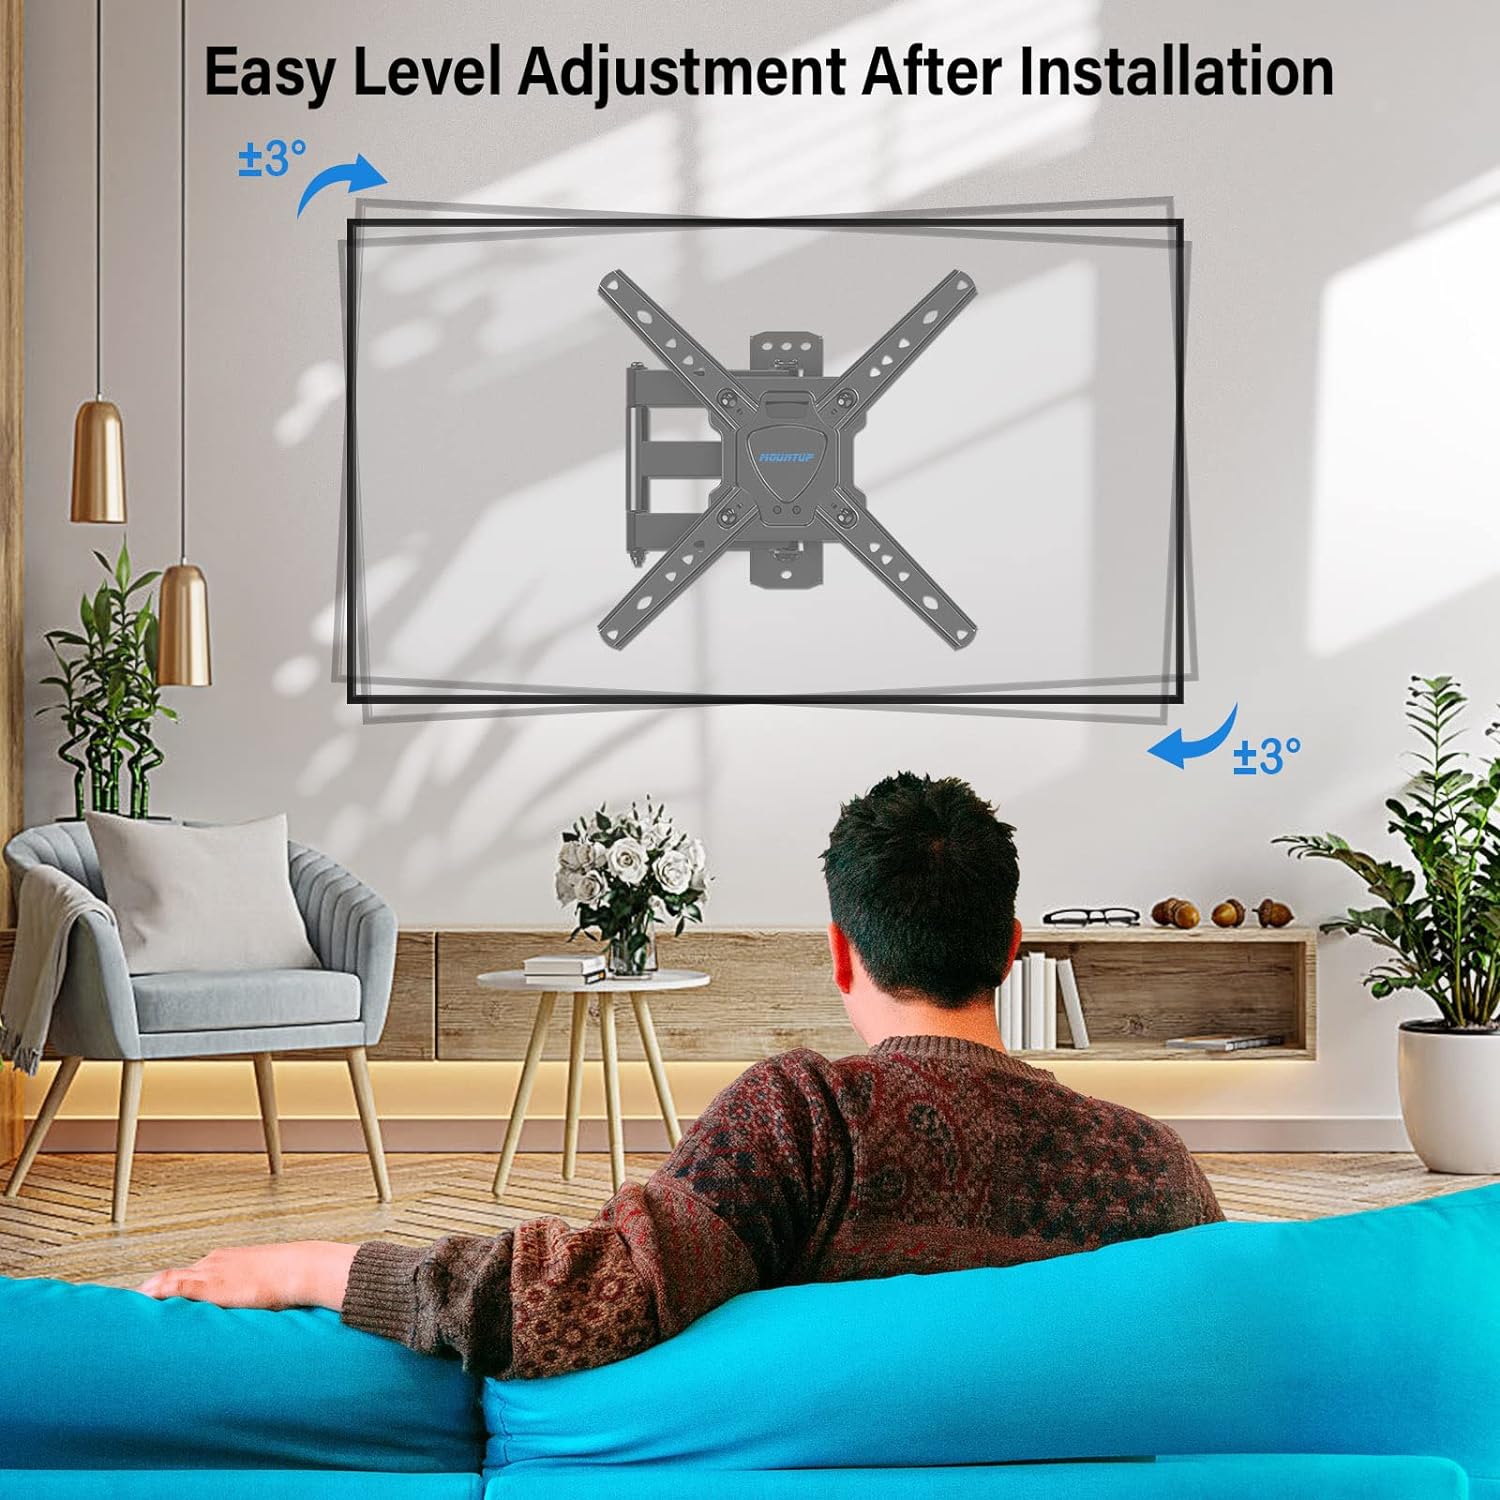 MOUNTUP Full Motion TV Wall Mount for Most 26-50 Inch TVs Level Adjustment